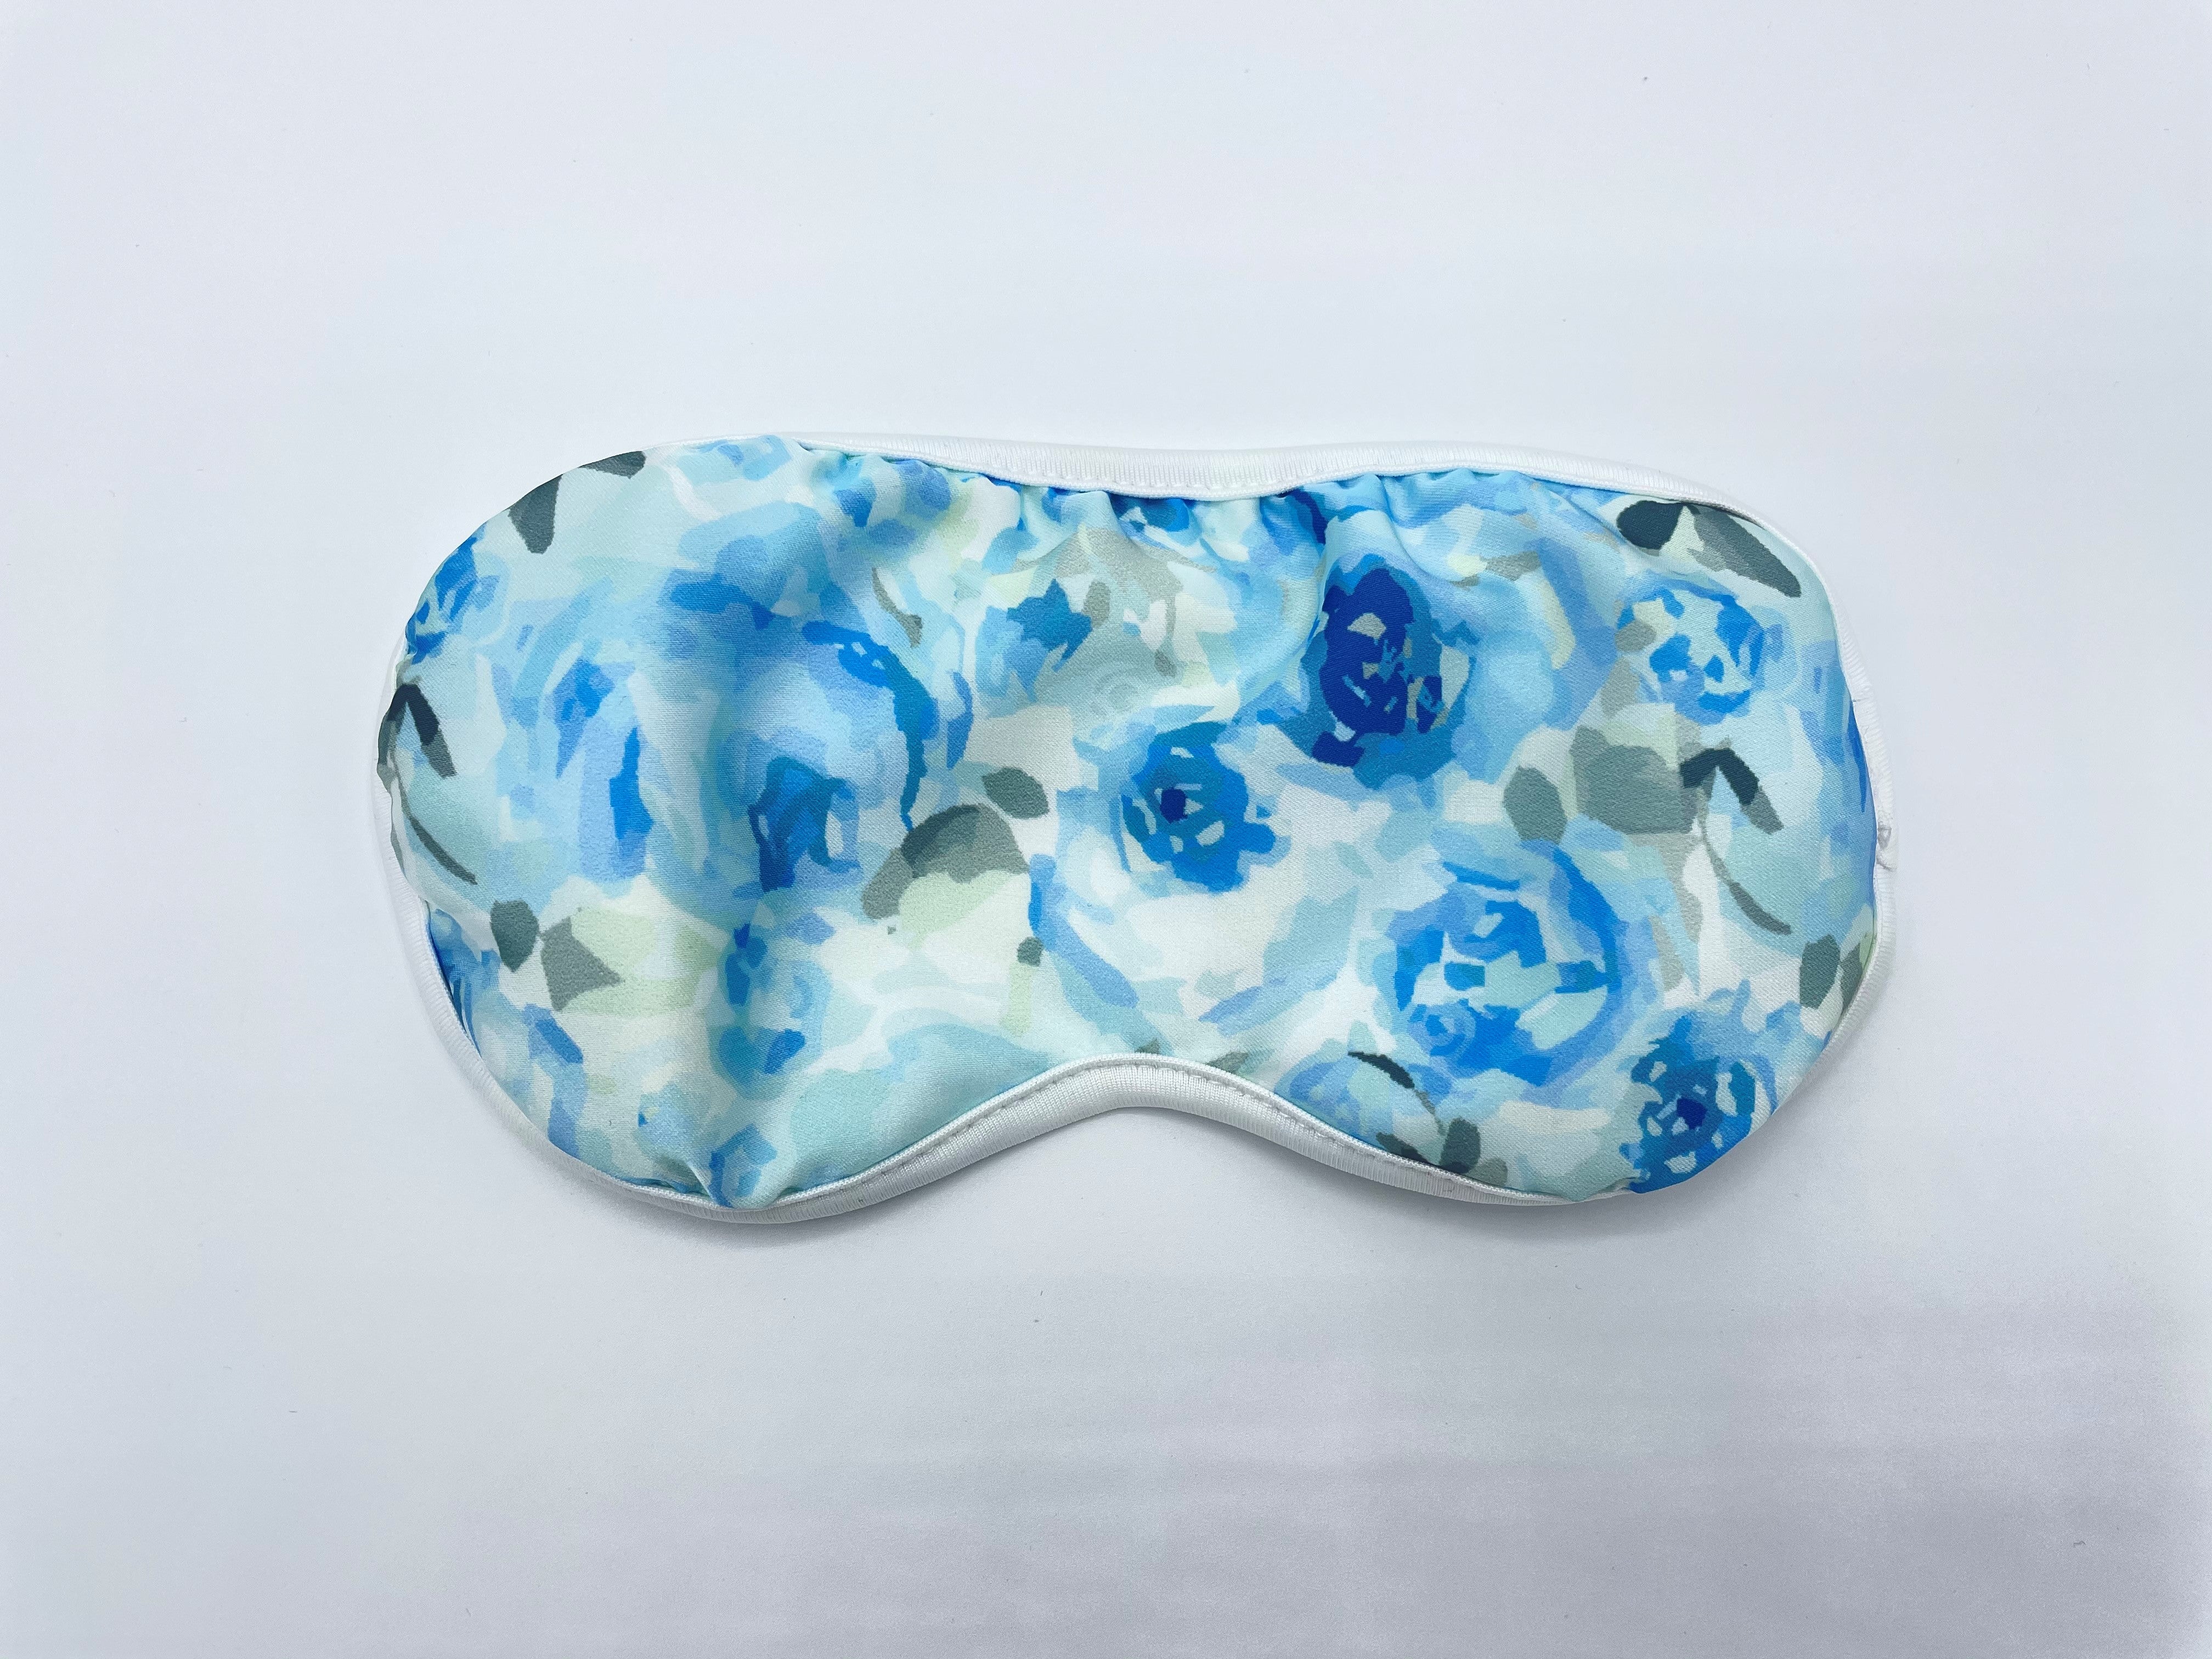 Blue floral eye mask made from recycled plastic